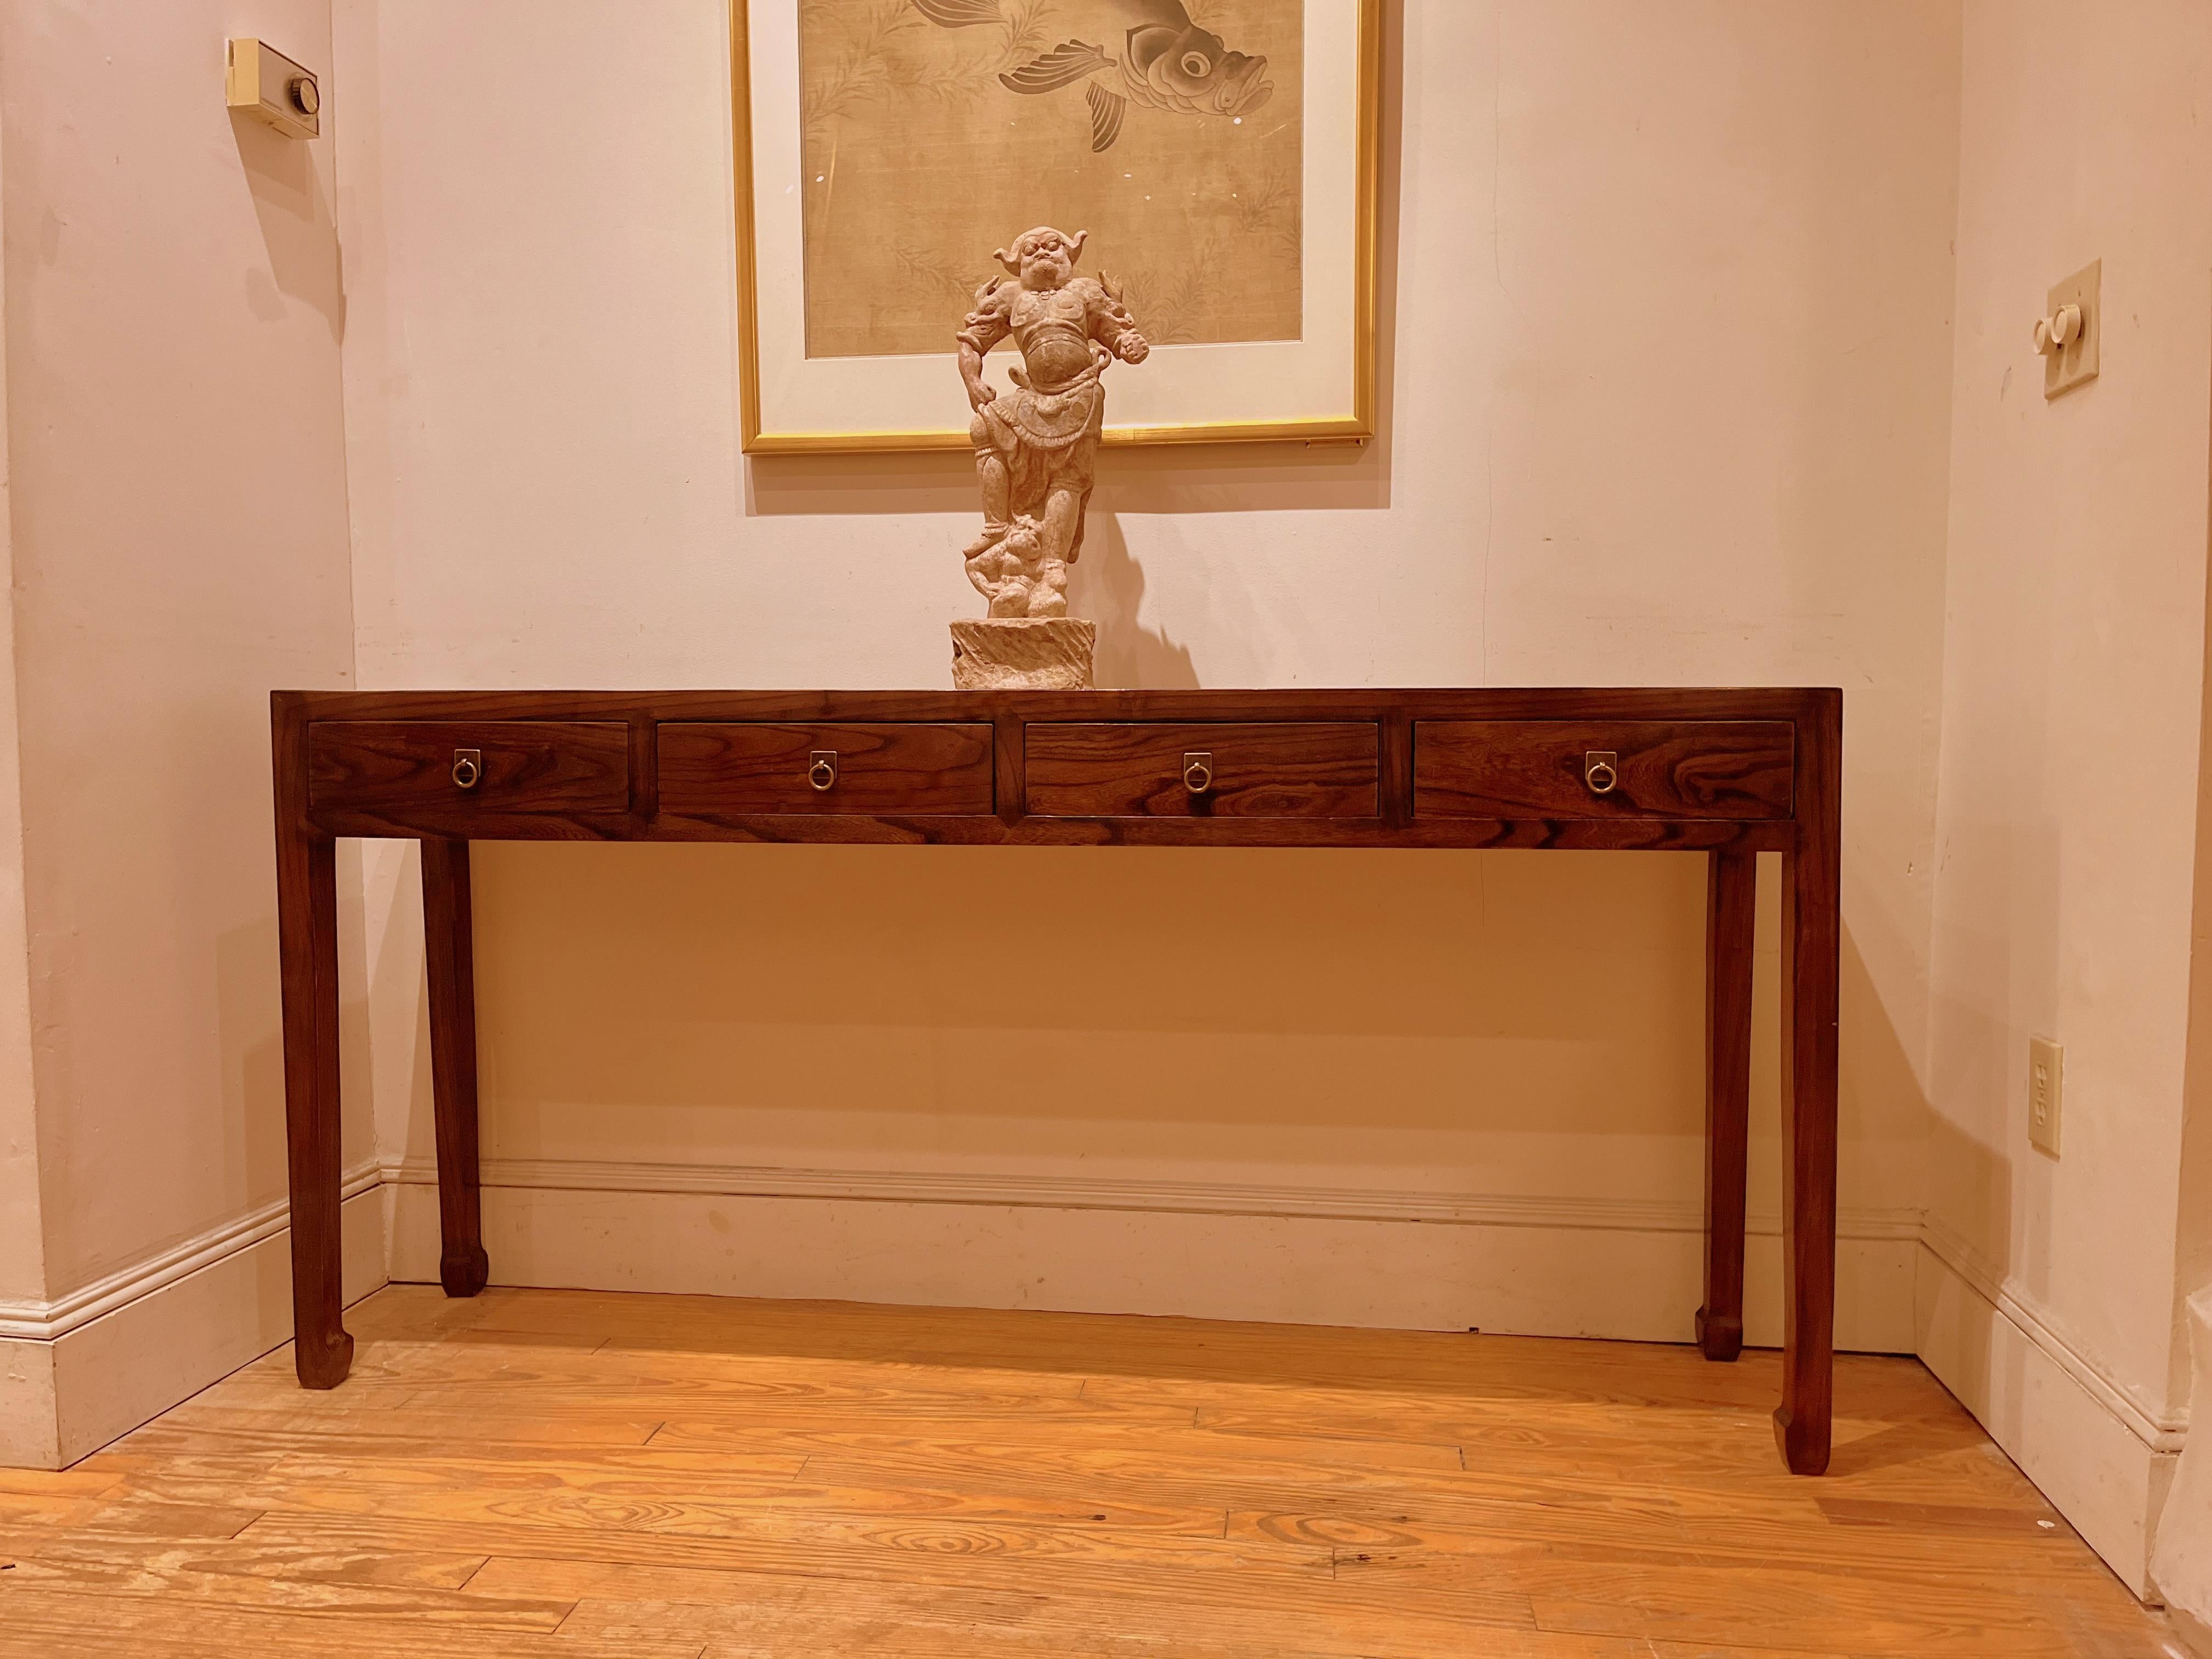 Fine Jumu Console Table with Drawers 4